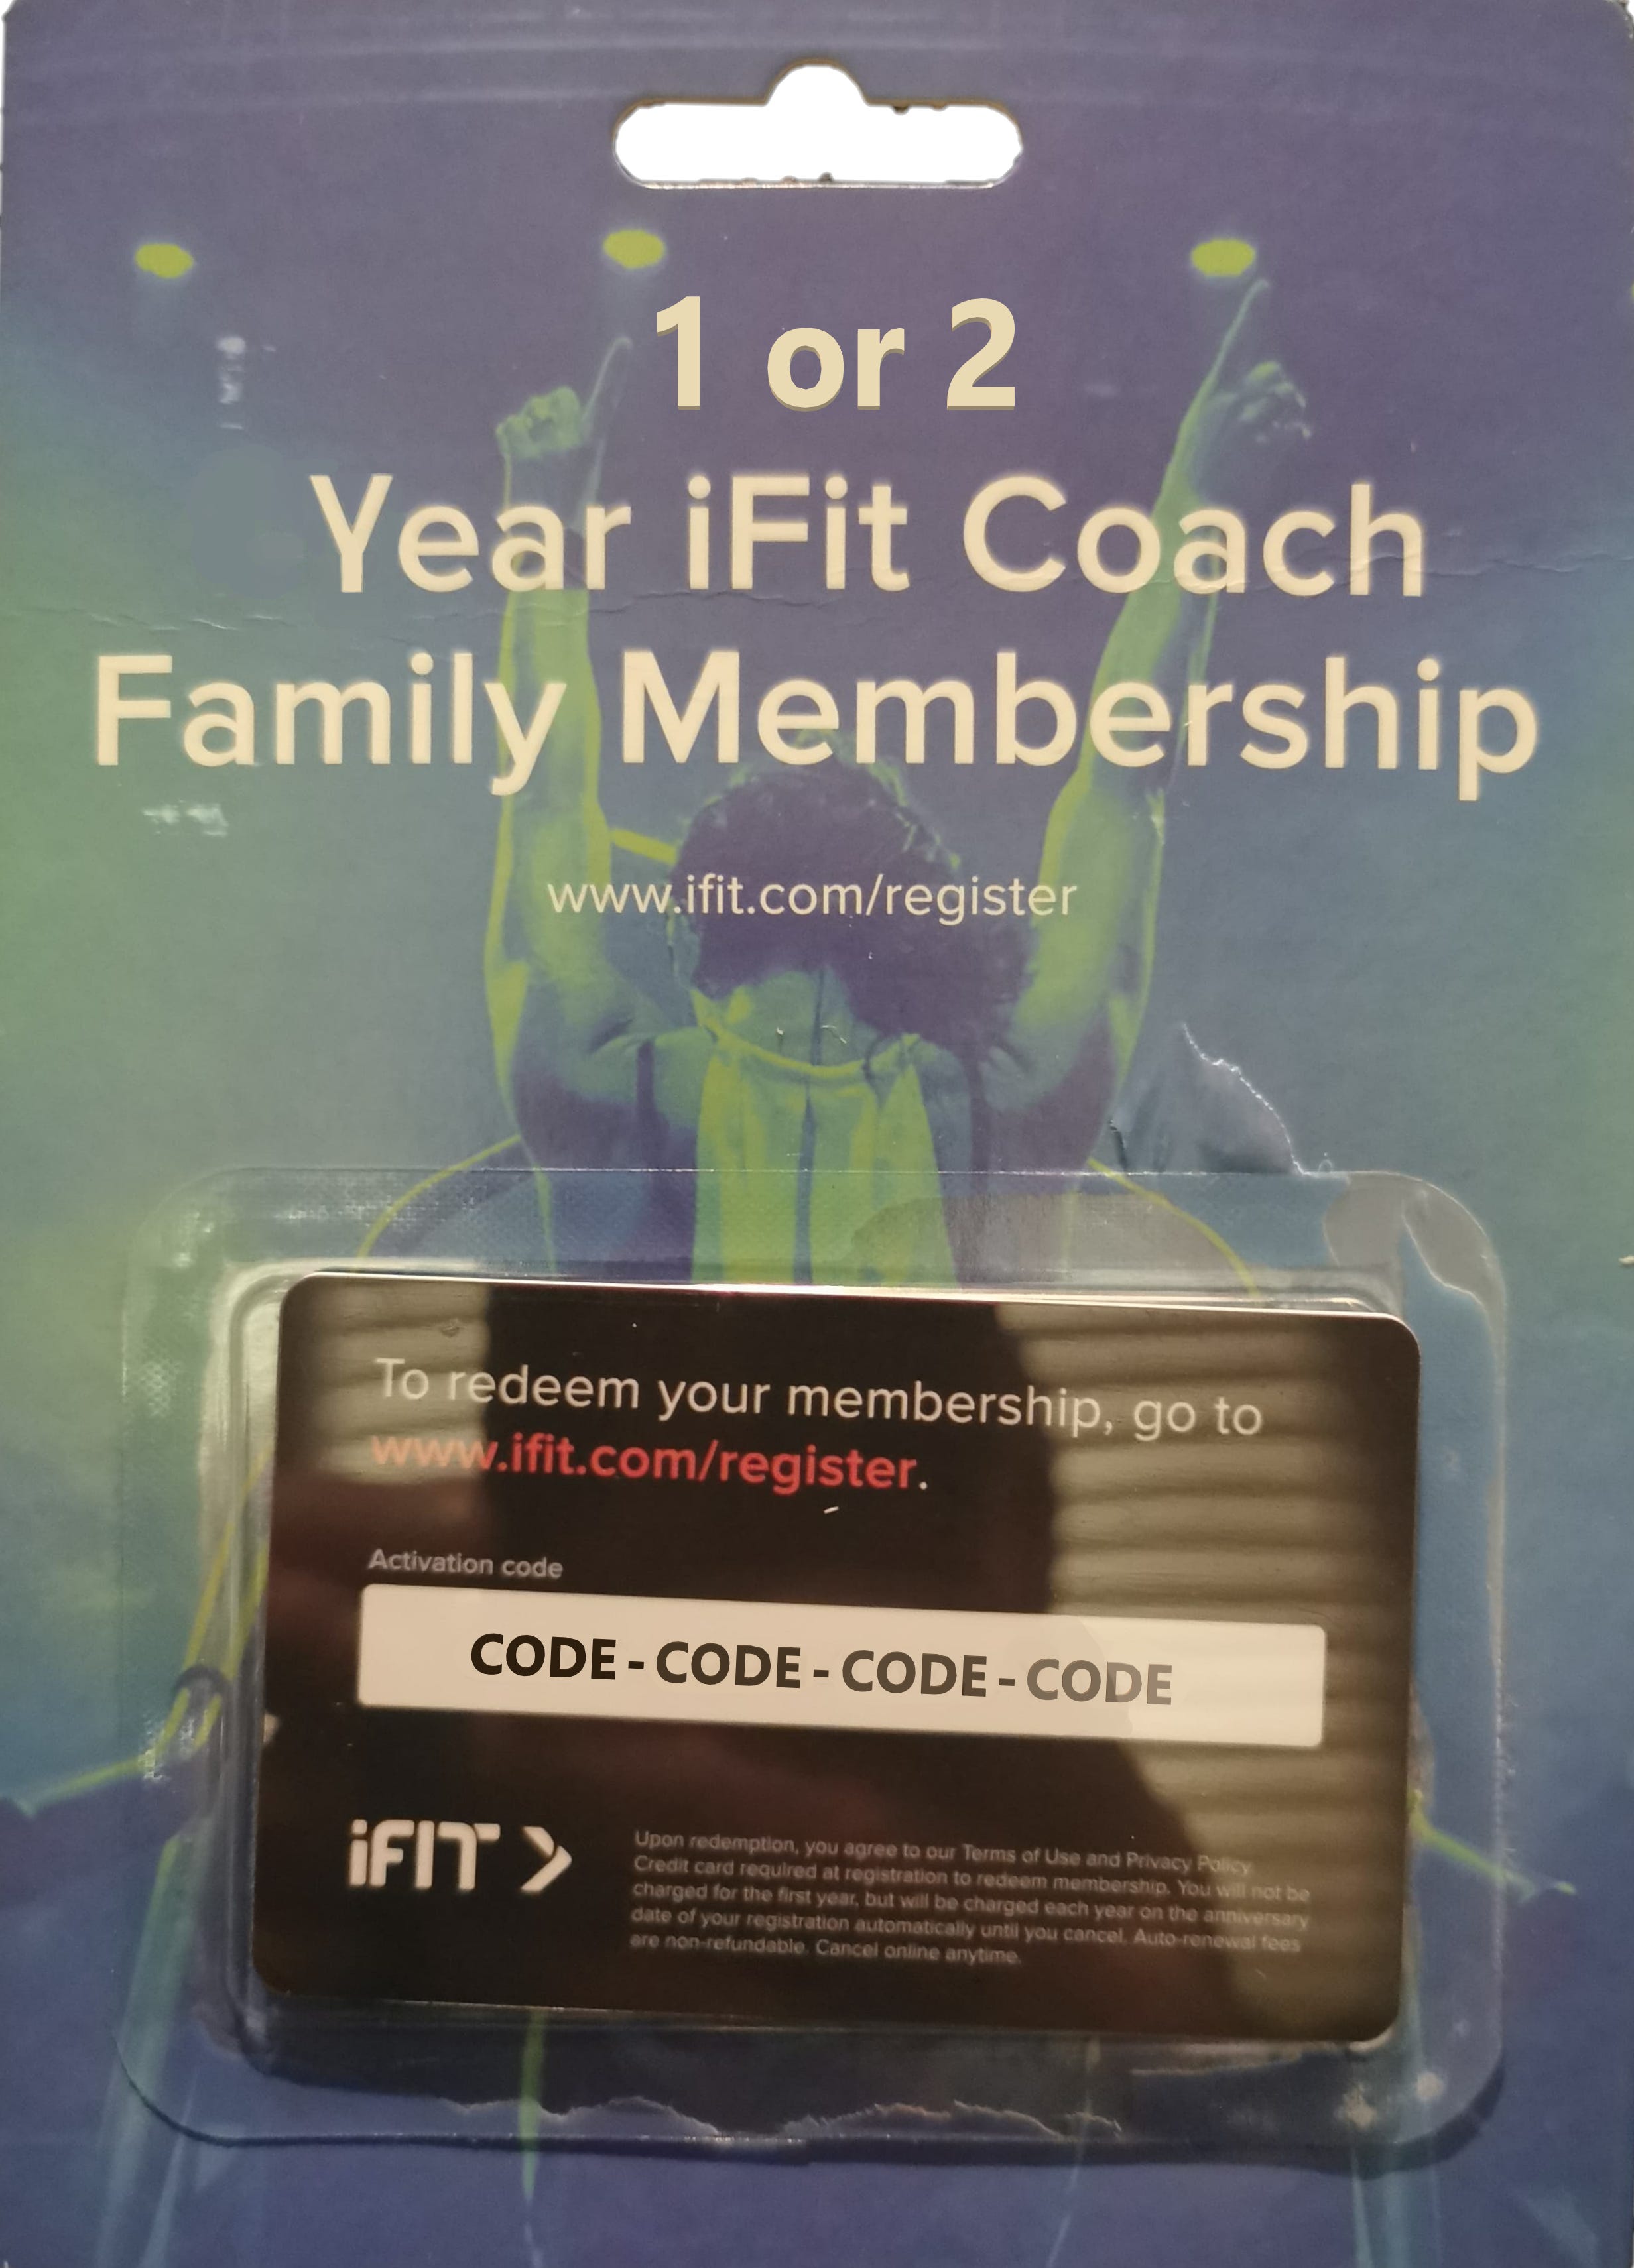 ALDI USA - Get a free 6-month iFit membership with this